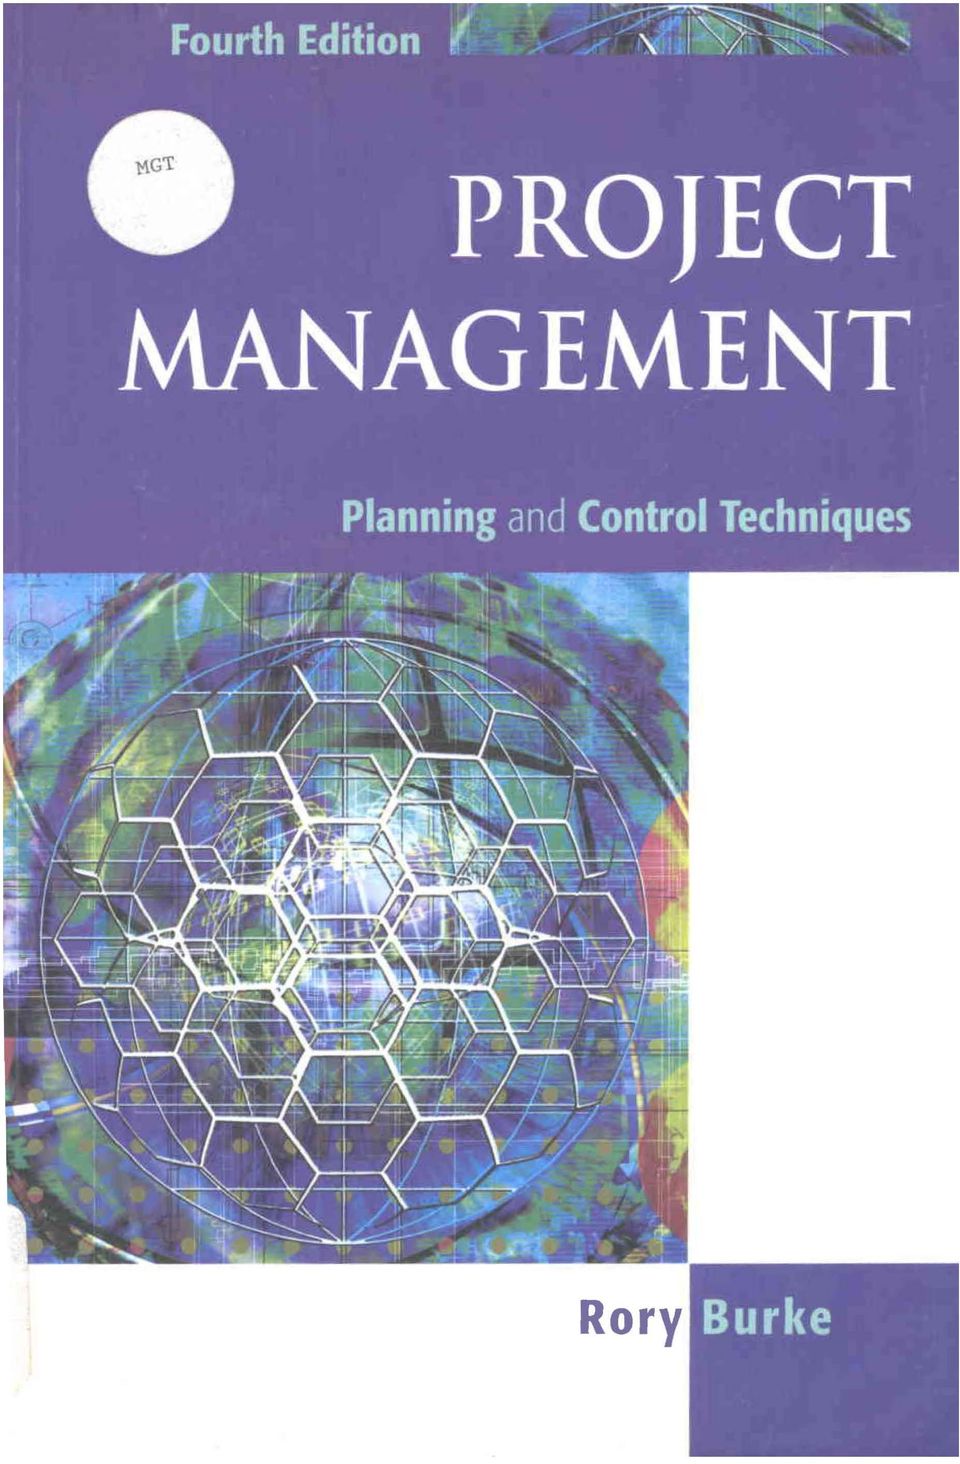 Fundamentals of project management rory burke torrent pdf